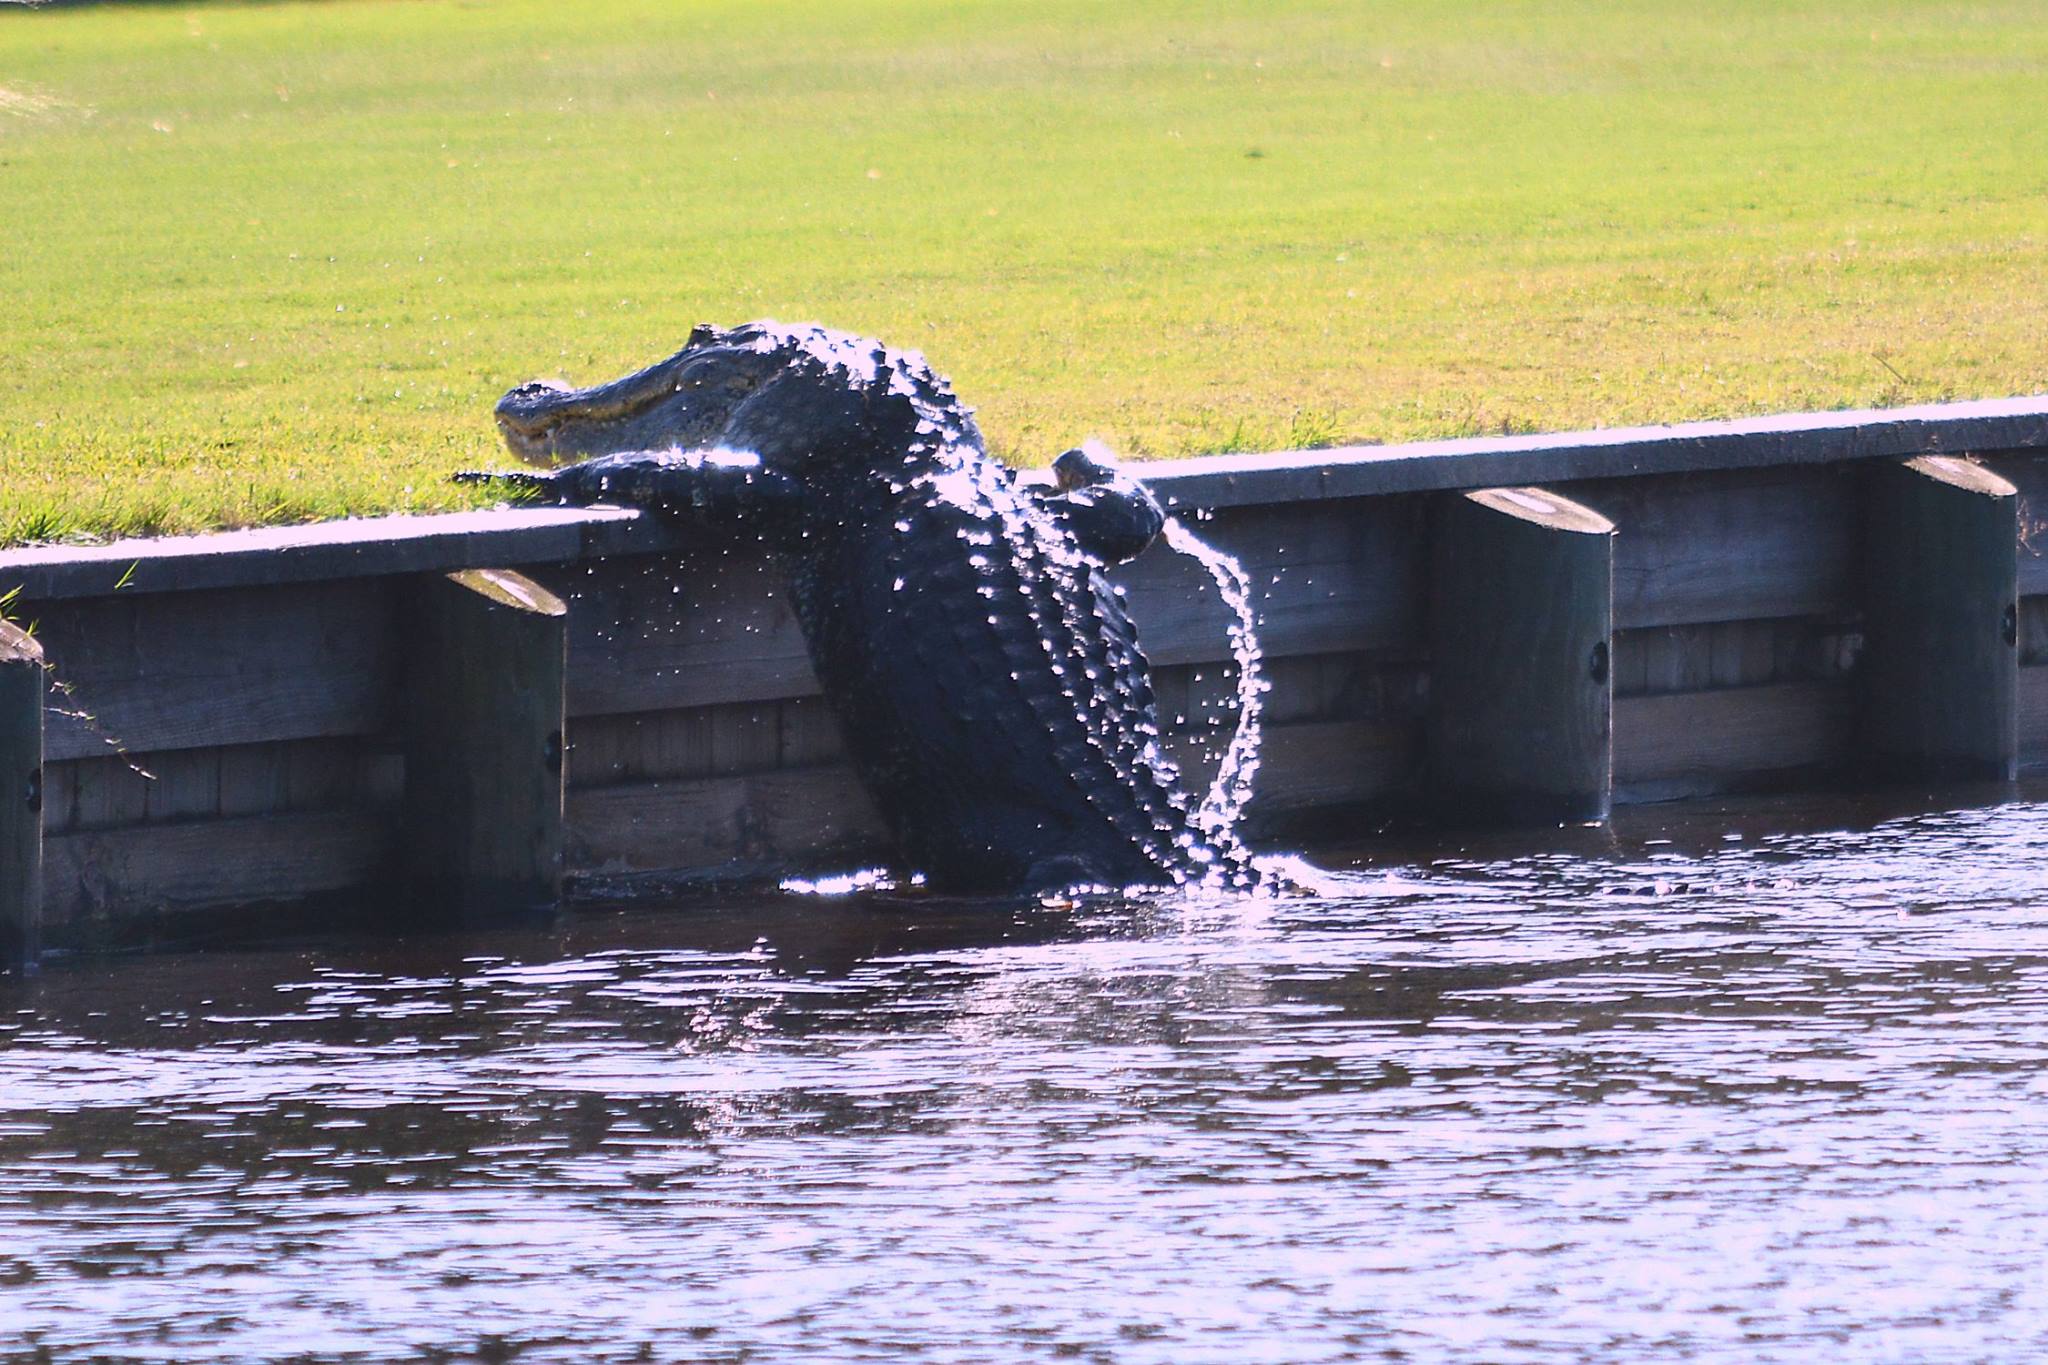 Goliath the alligator climbs out the water at Myakka Pines Golf Club in Englewood. Fla. (Source: Lynn Sarles/Facebook)